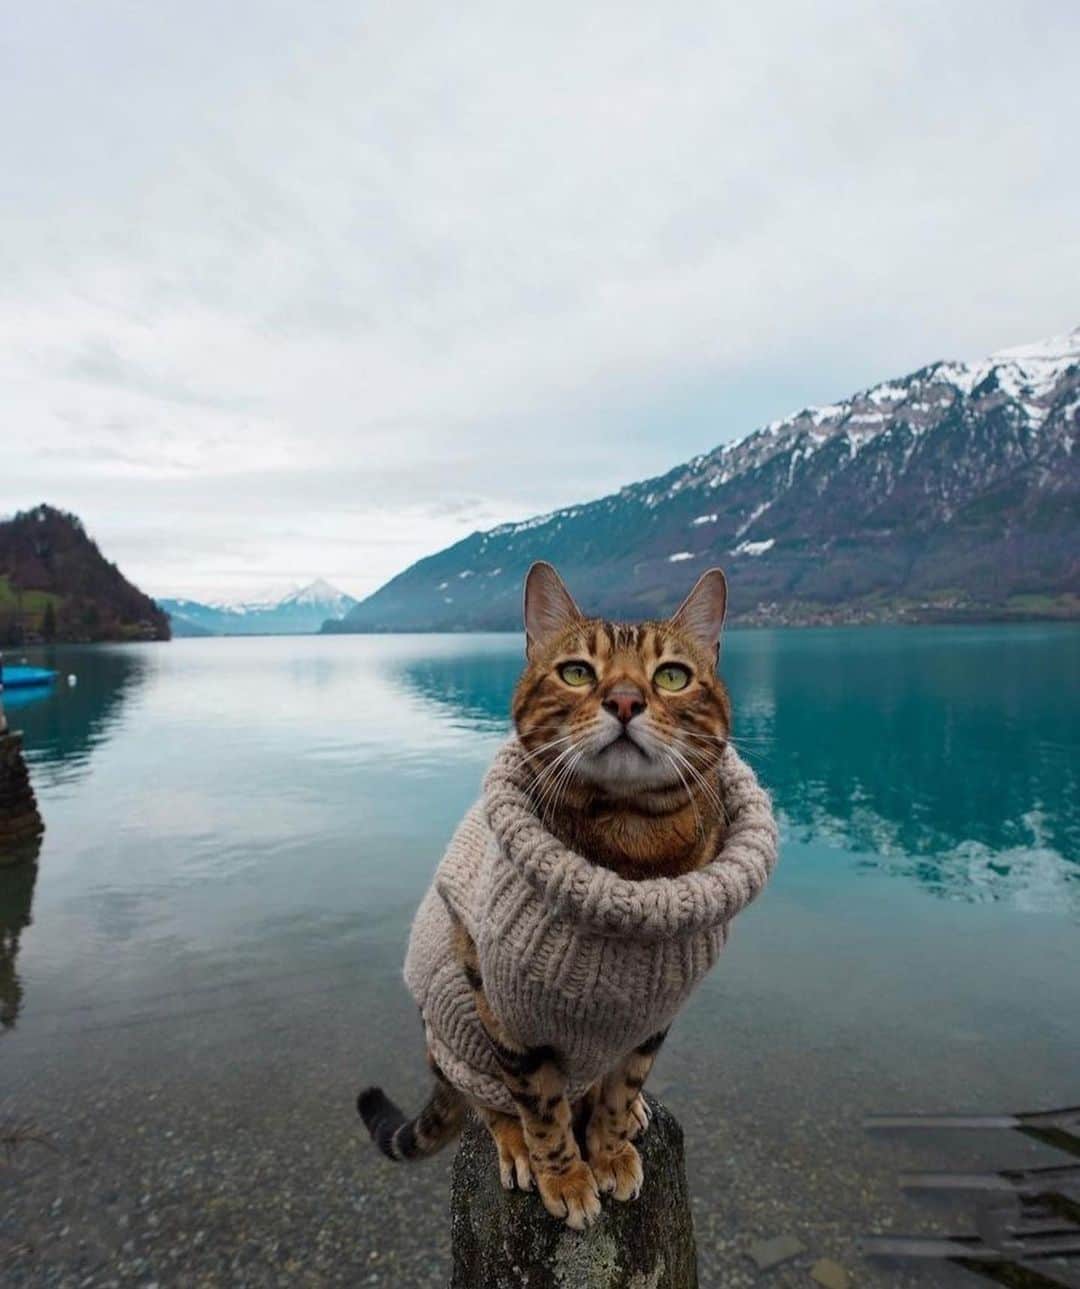 Bolt and Keelのインスタグラム：「Meet Alex! 🏞🐾 He loves soaking in these beautiful views while traveling around Europe with his pawrents! 🌲  @adventrapets ➡️ @thebengalalex  —————————————————— Follow @adventrapets to meet cute, brave and inspiring adventure pets from all over the world! 🌲🐶🐱🌲  • TAG US IN YOUR POSTS to get your little adventurer featured! #adventrapets ——————————————————」